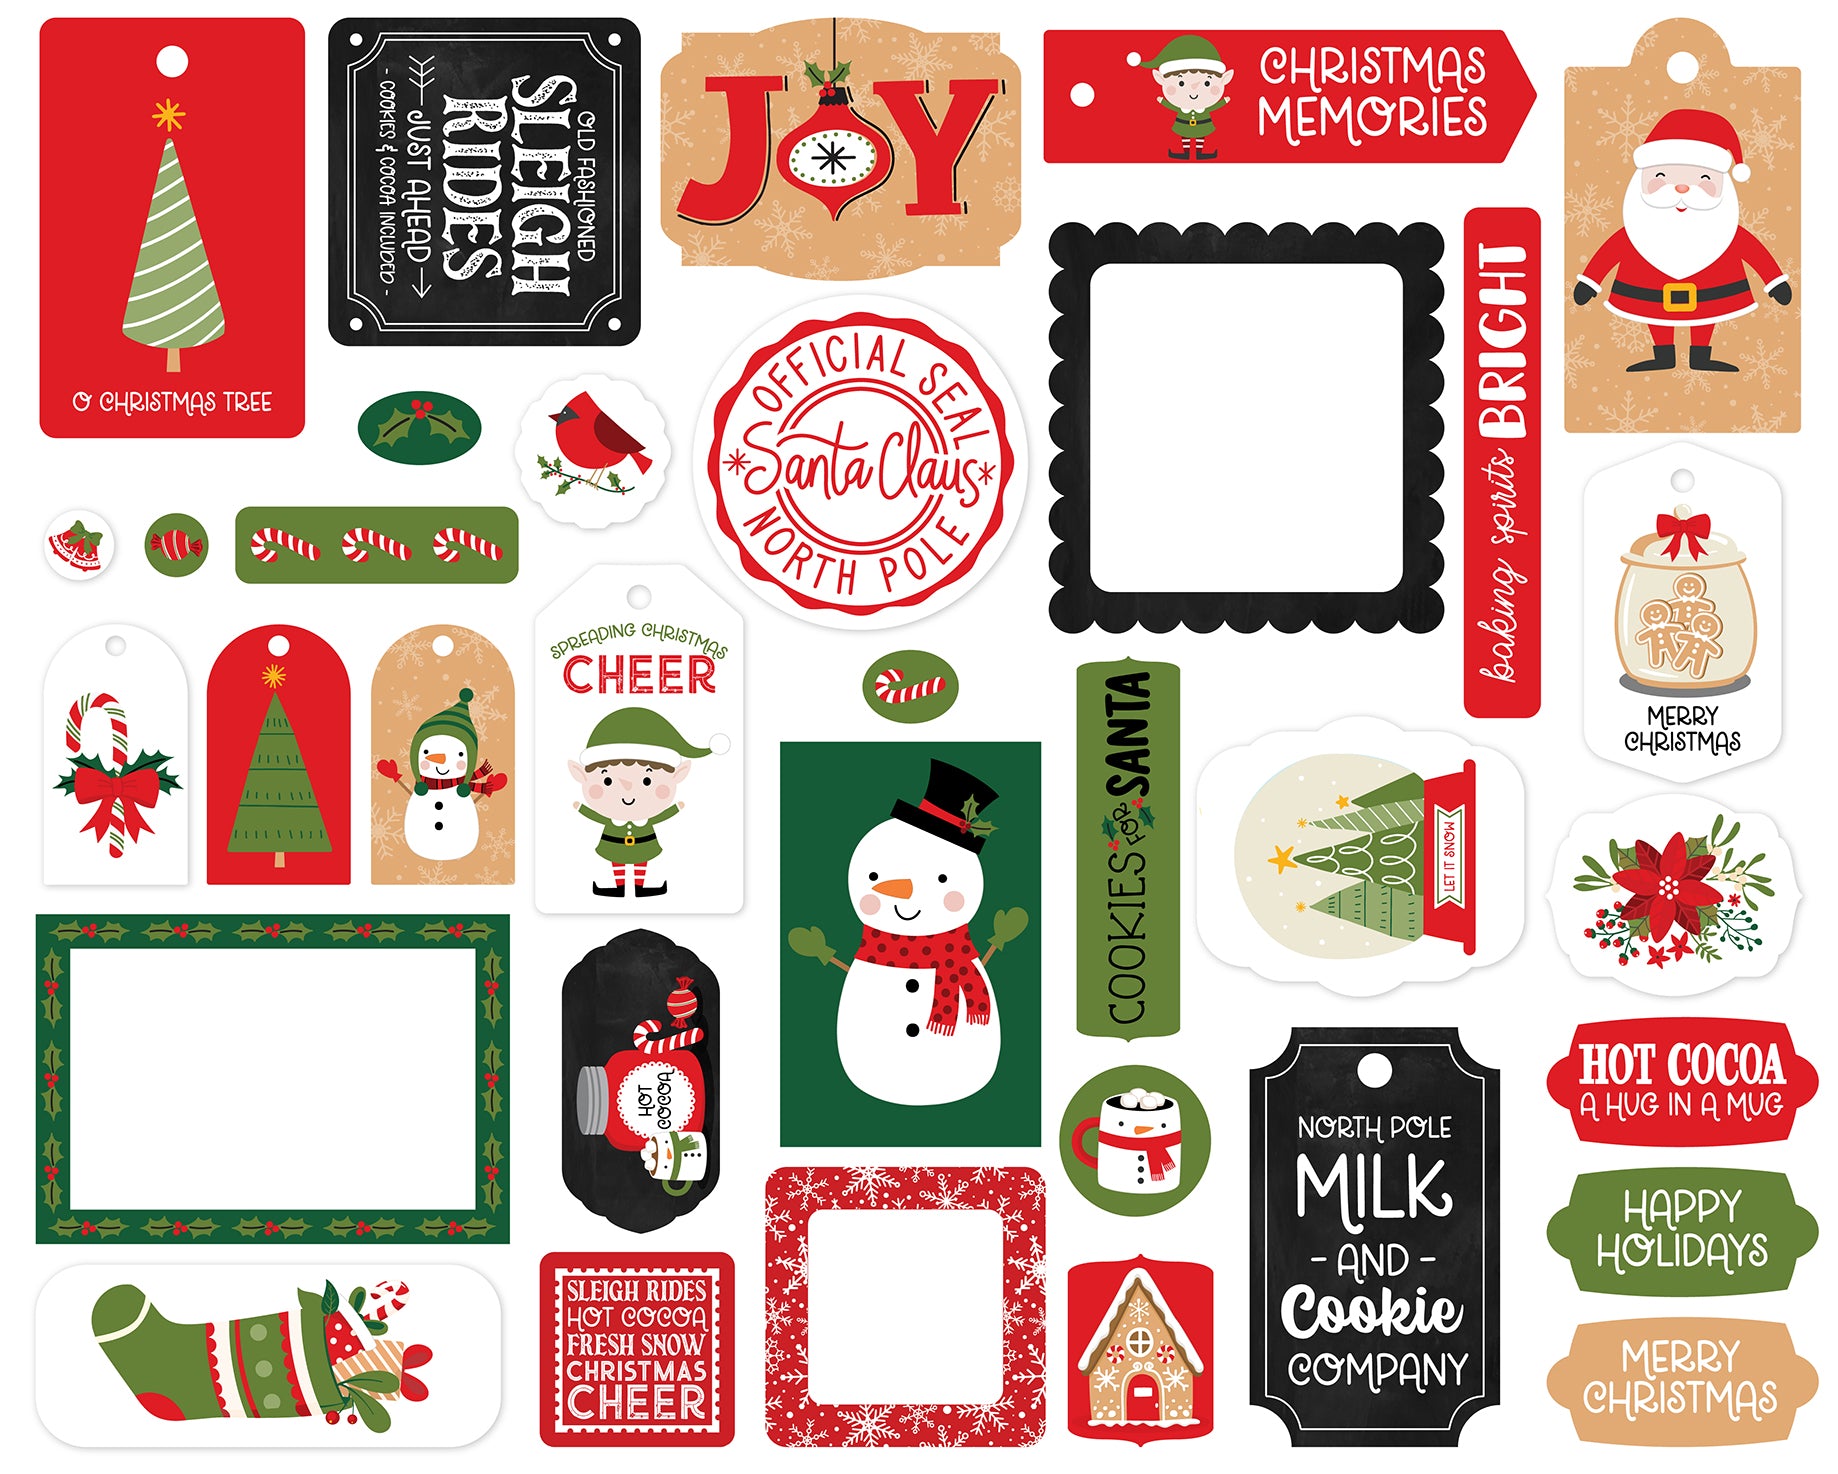 Have A Holly Jolly Christmas Collection Scrapbook Frames & Tags by Echo Park